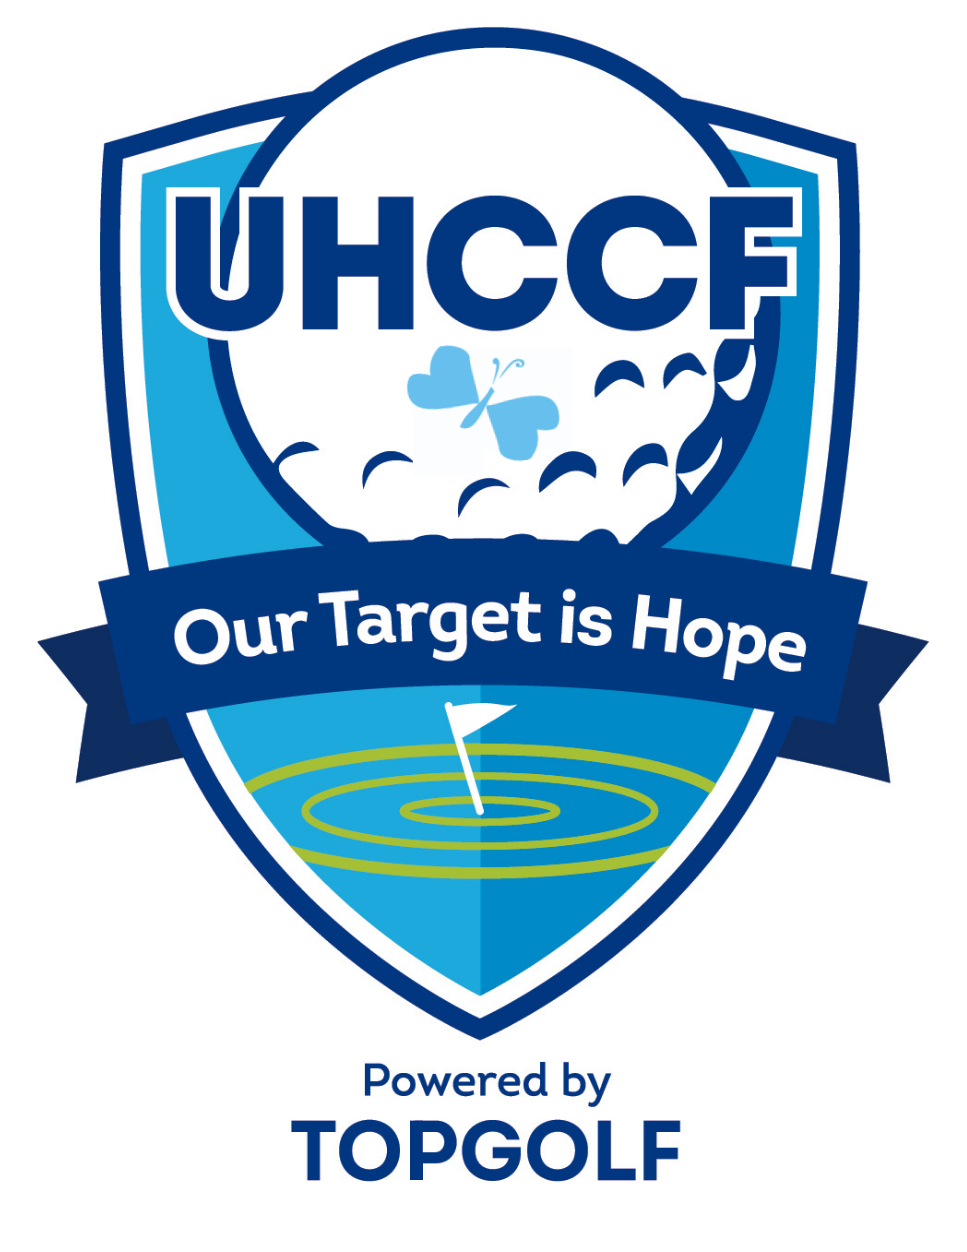 UHCCF Topgolf logo crest with text Our Targer is Hope